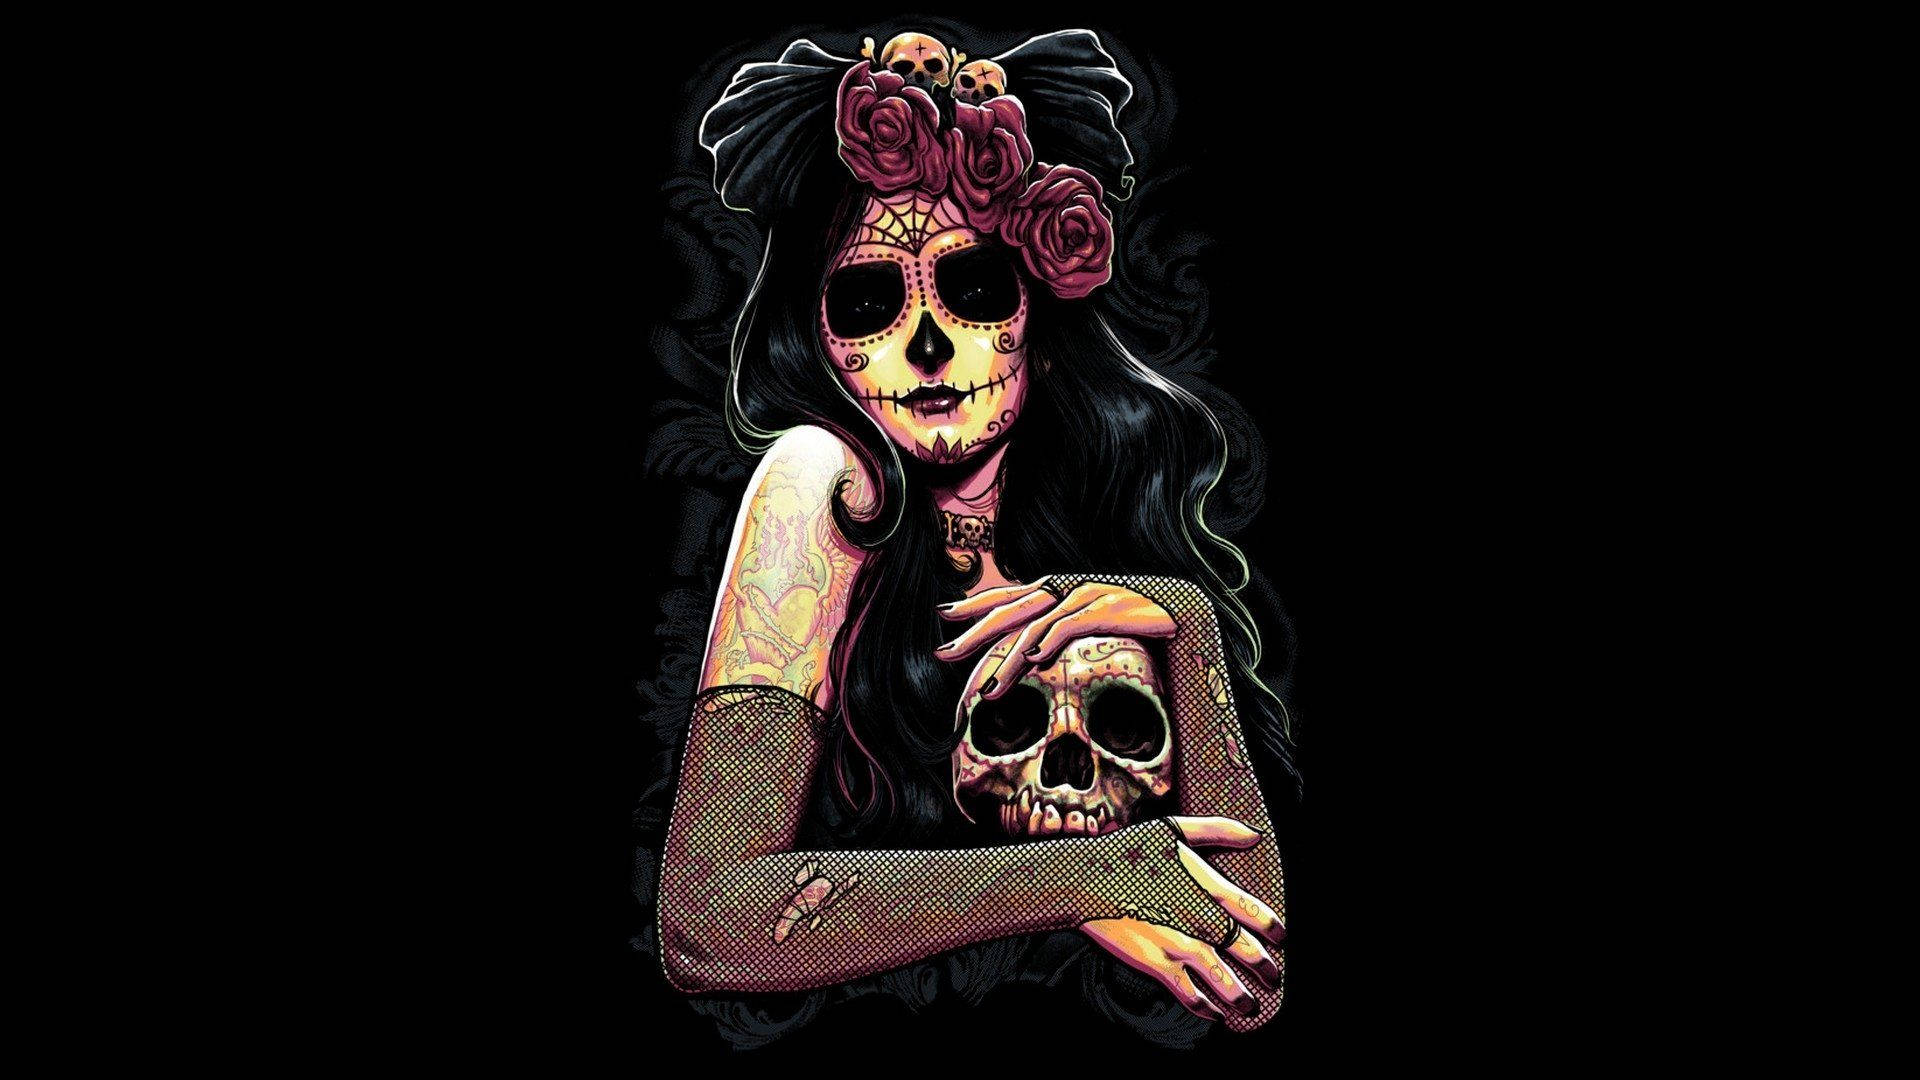 A Mysterious Skull of a Woman Wallpaper